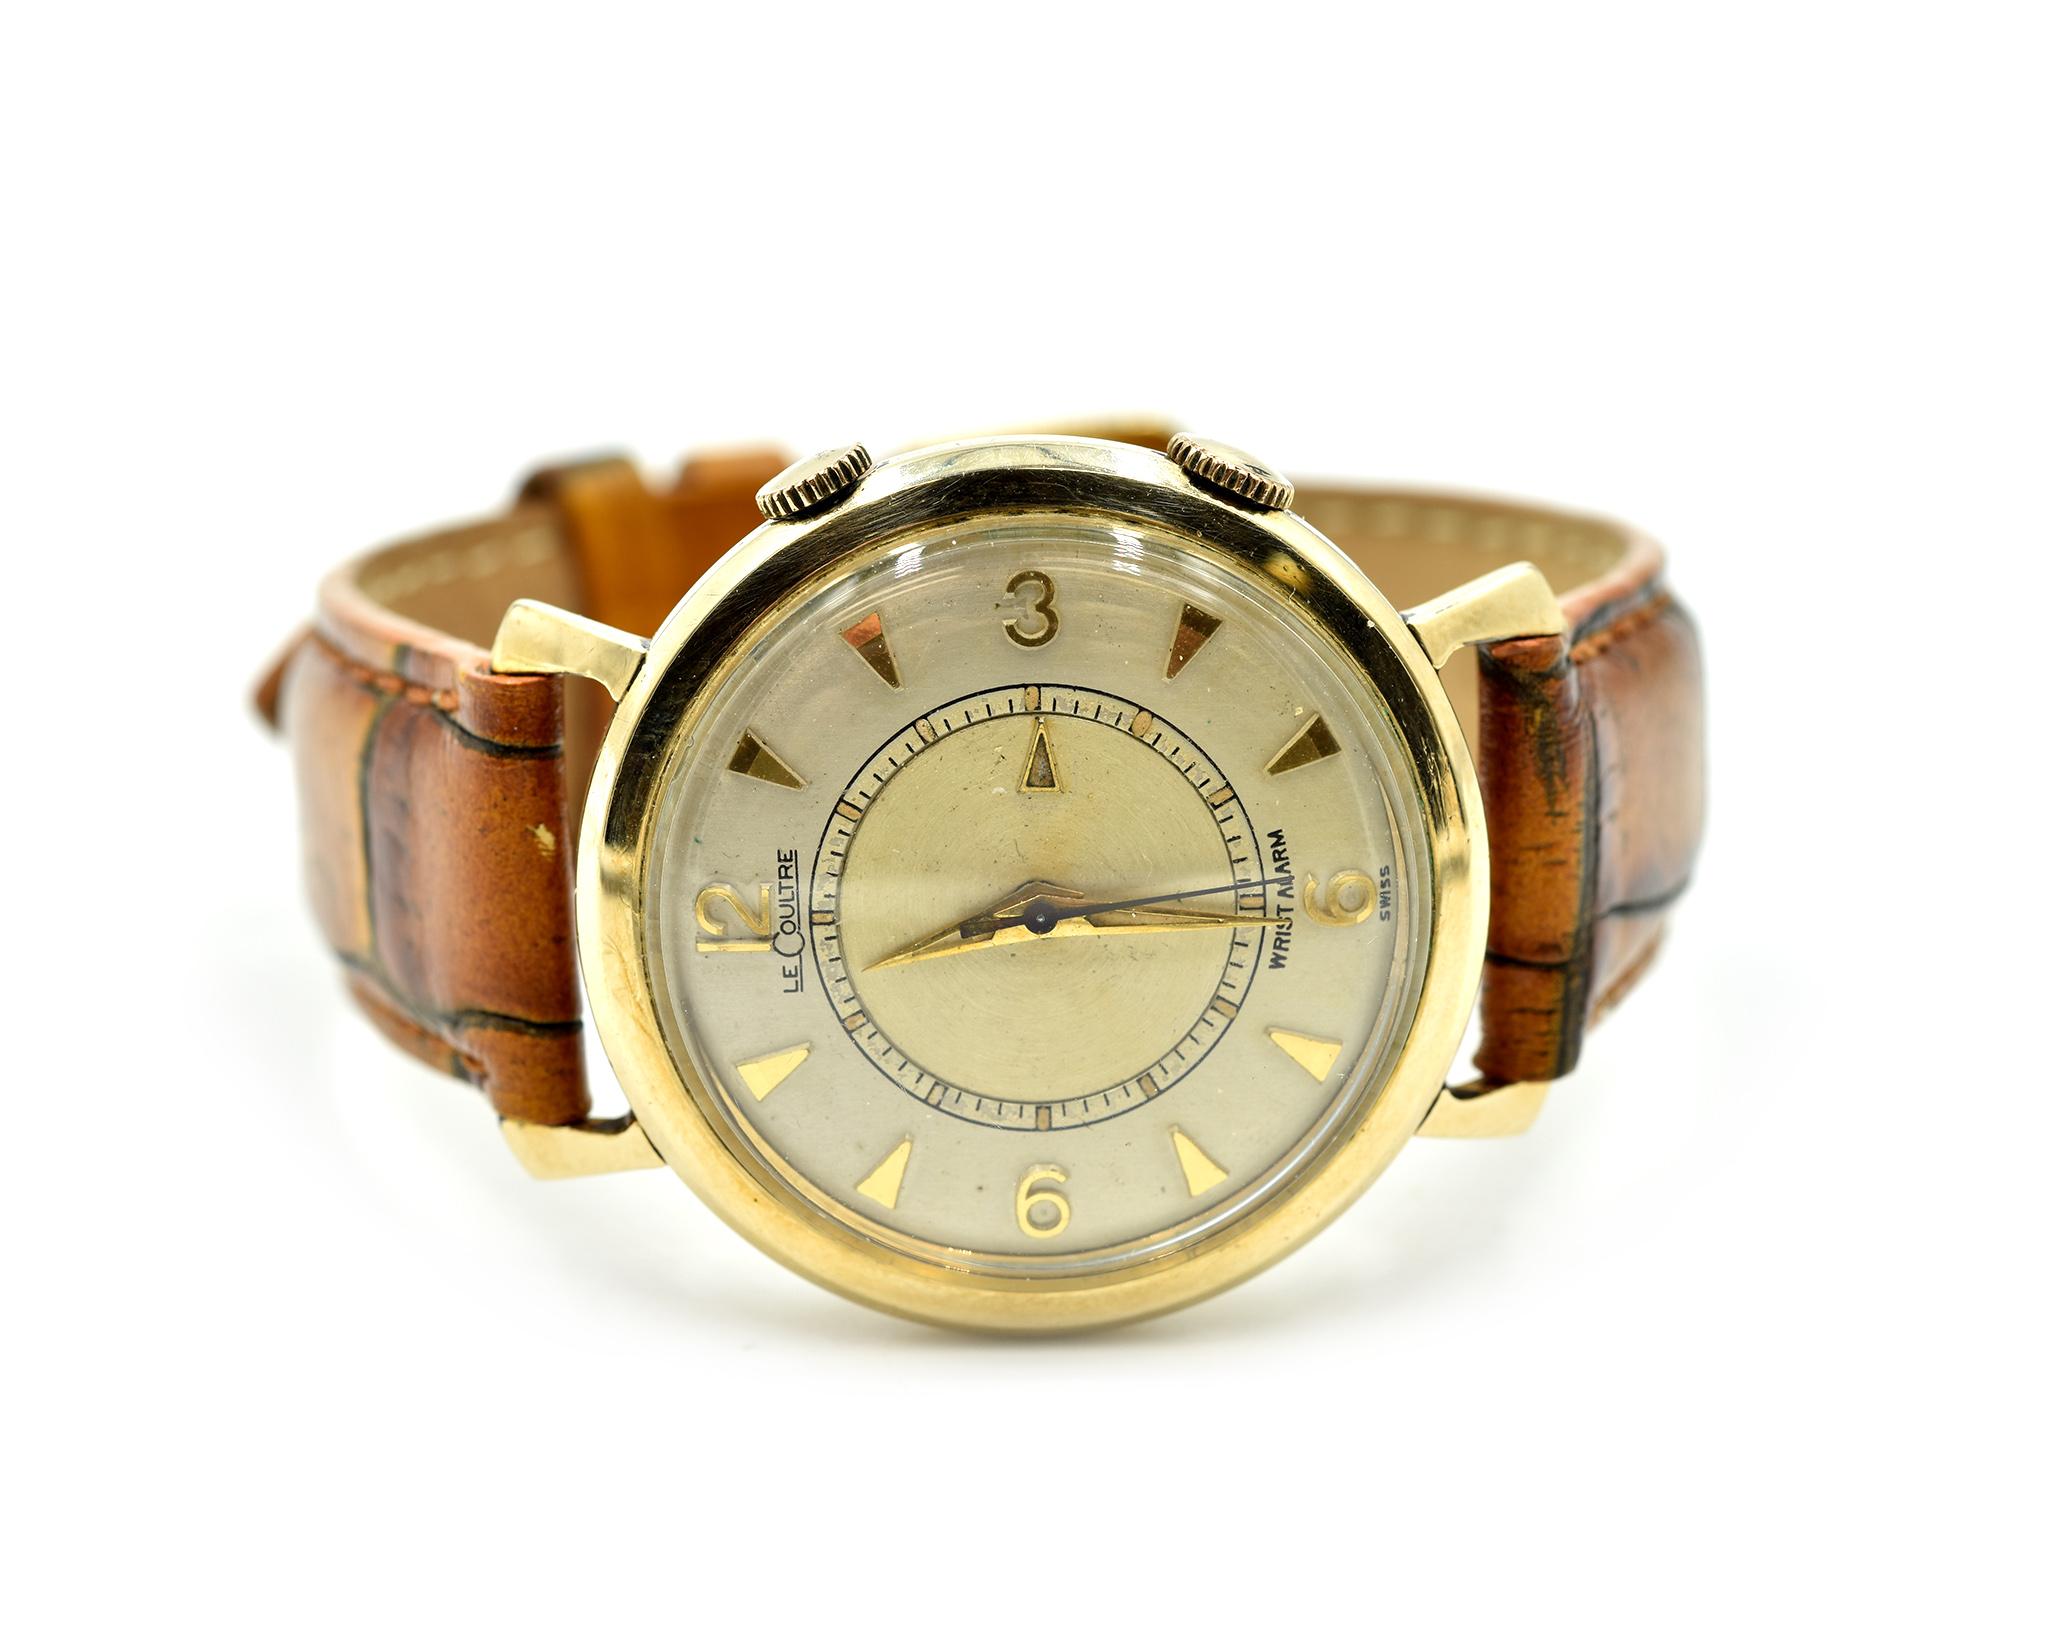 Movement: manual wind
Function: seconds, hours, minutes, alarm
Case: 34mm 10k yellow case with plastic crystal, gold bezel, pull/push crown
Band: genuine leather band with gold buckle
Dial: silver dial with gold spear and arabic hour markers
Serial: